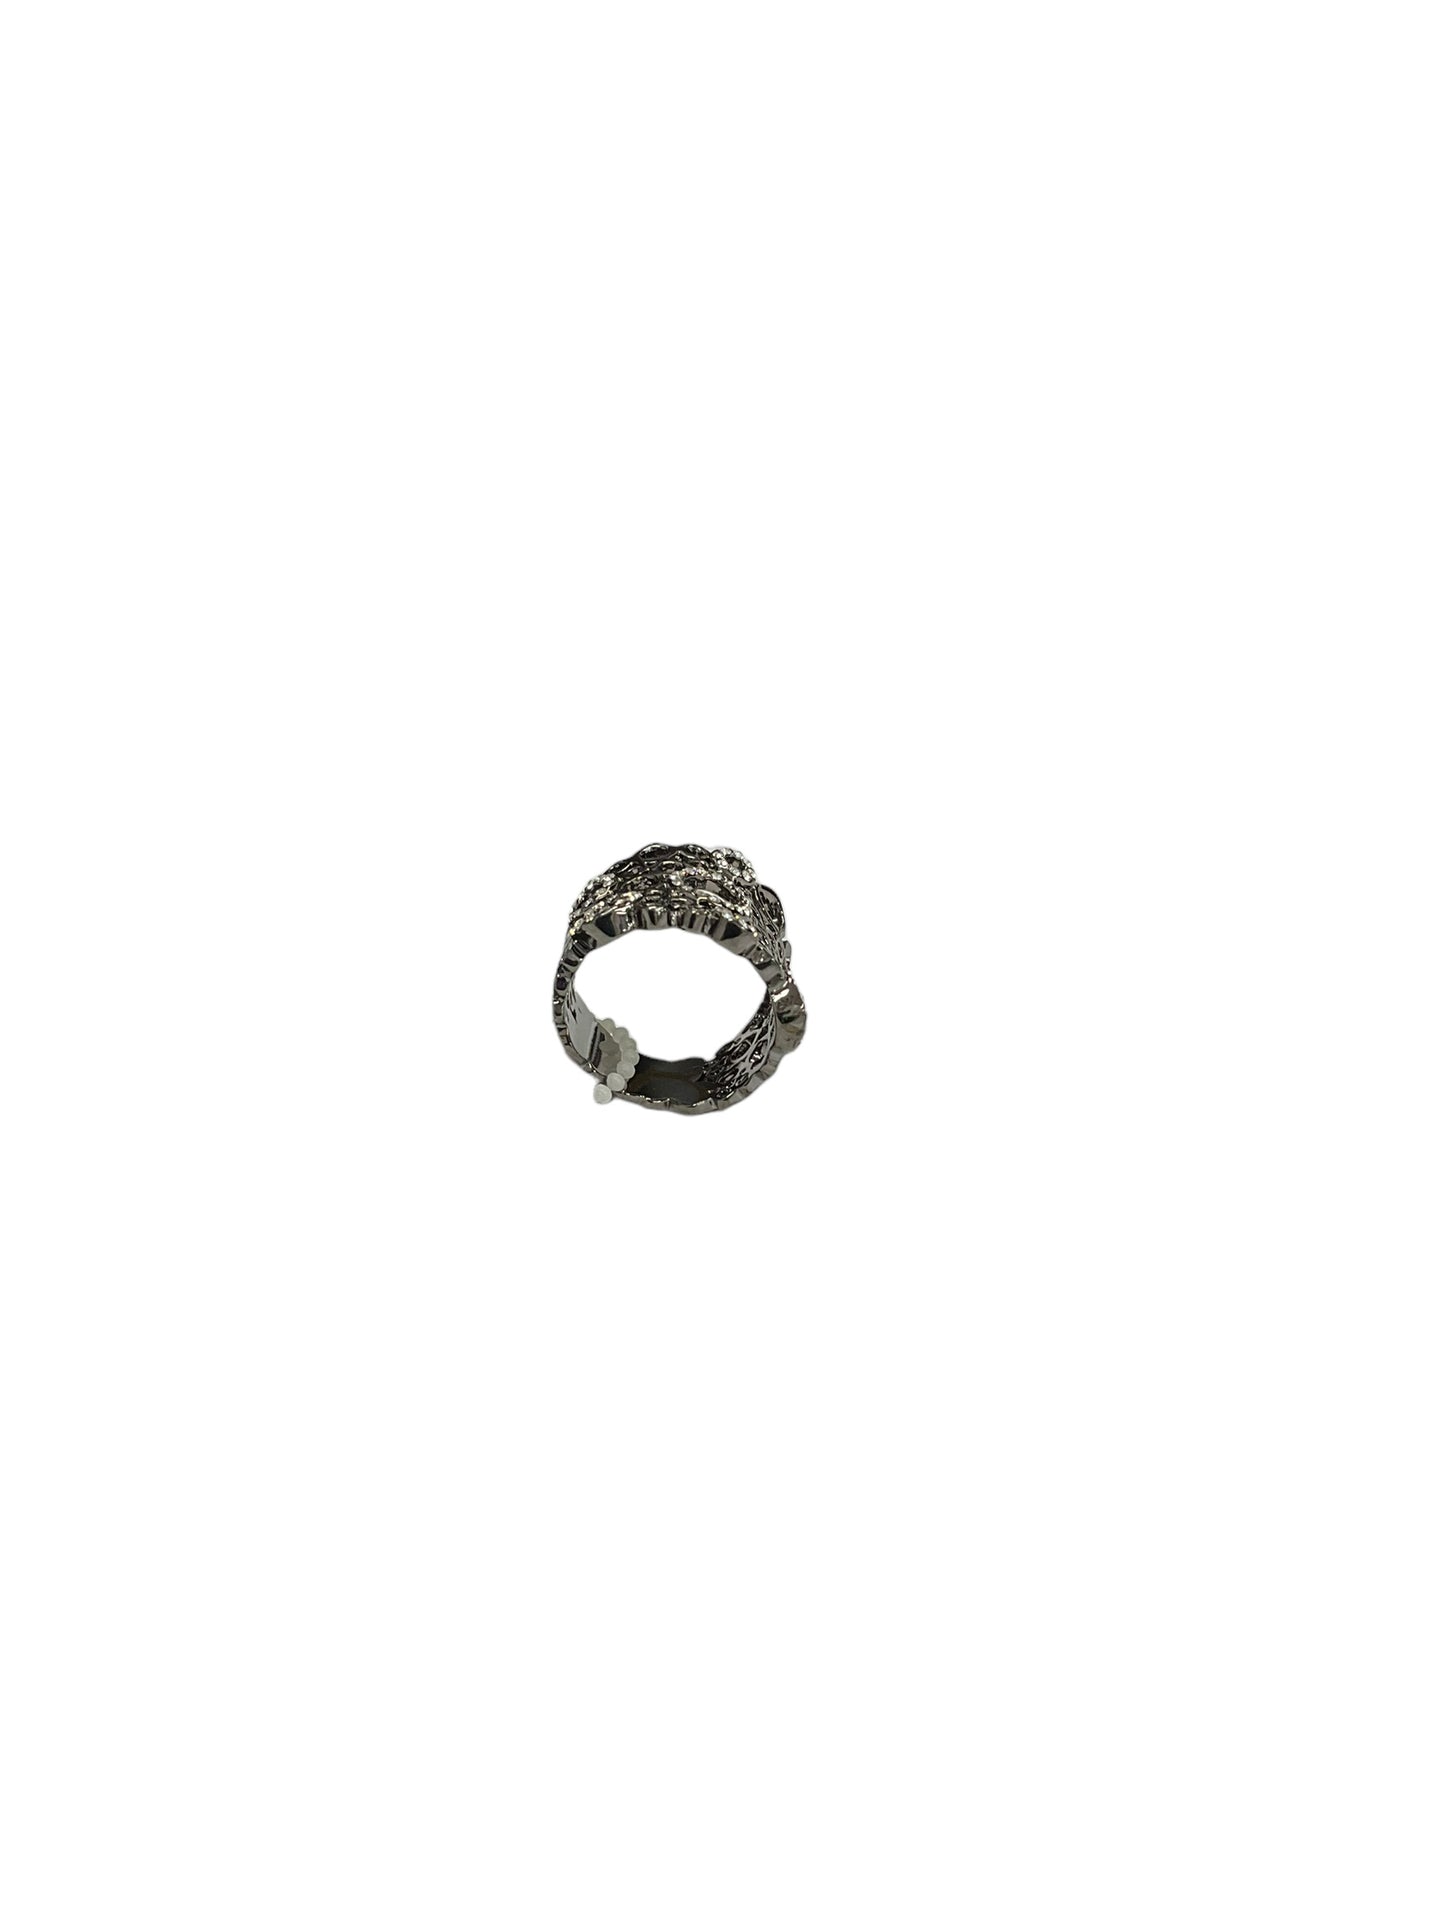 Ring Band By Clothes Mentor